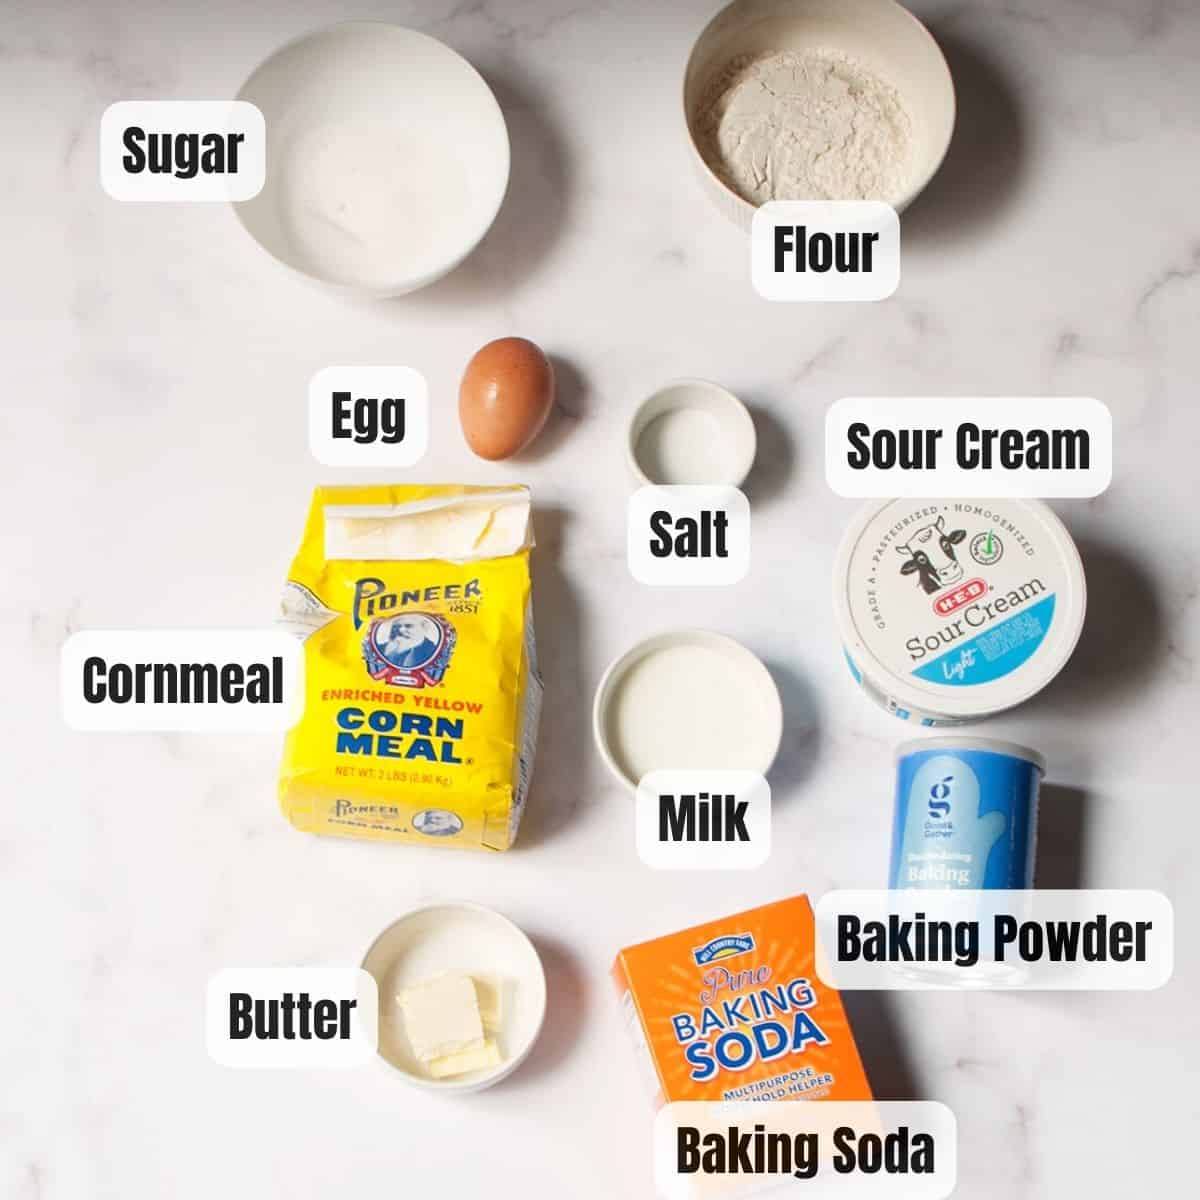 The ingredients needed to make Jumbo corn muffins. Each ingredient is labeled.